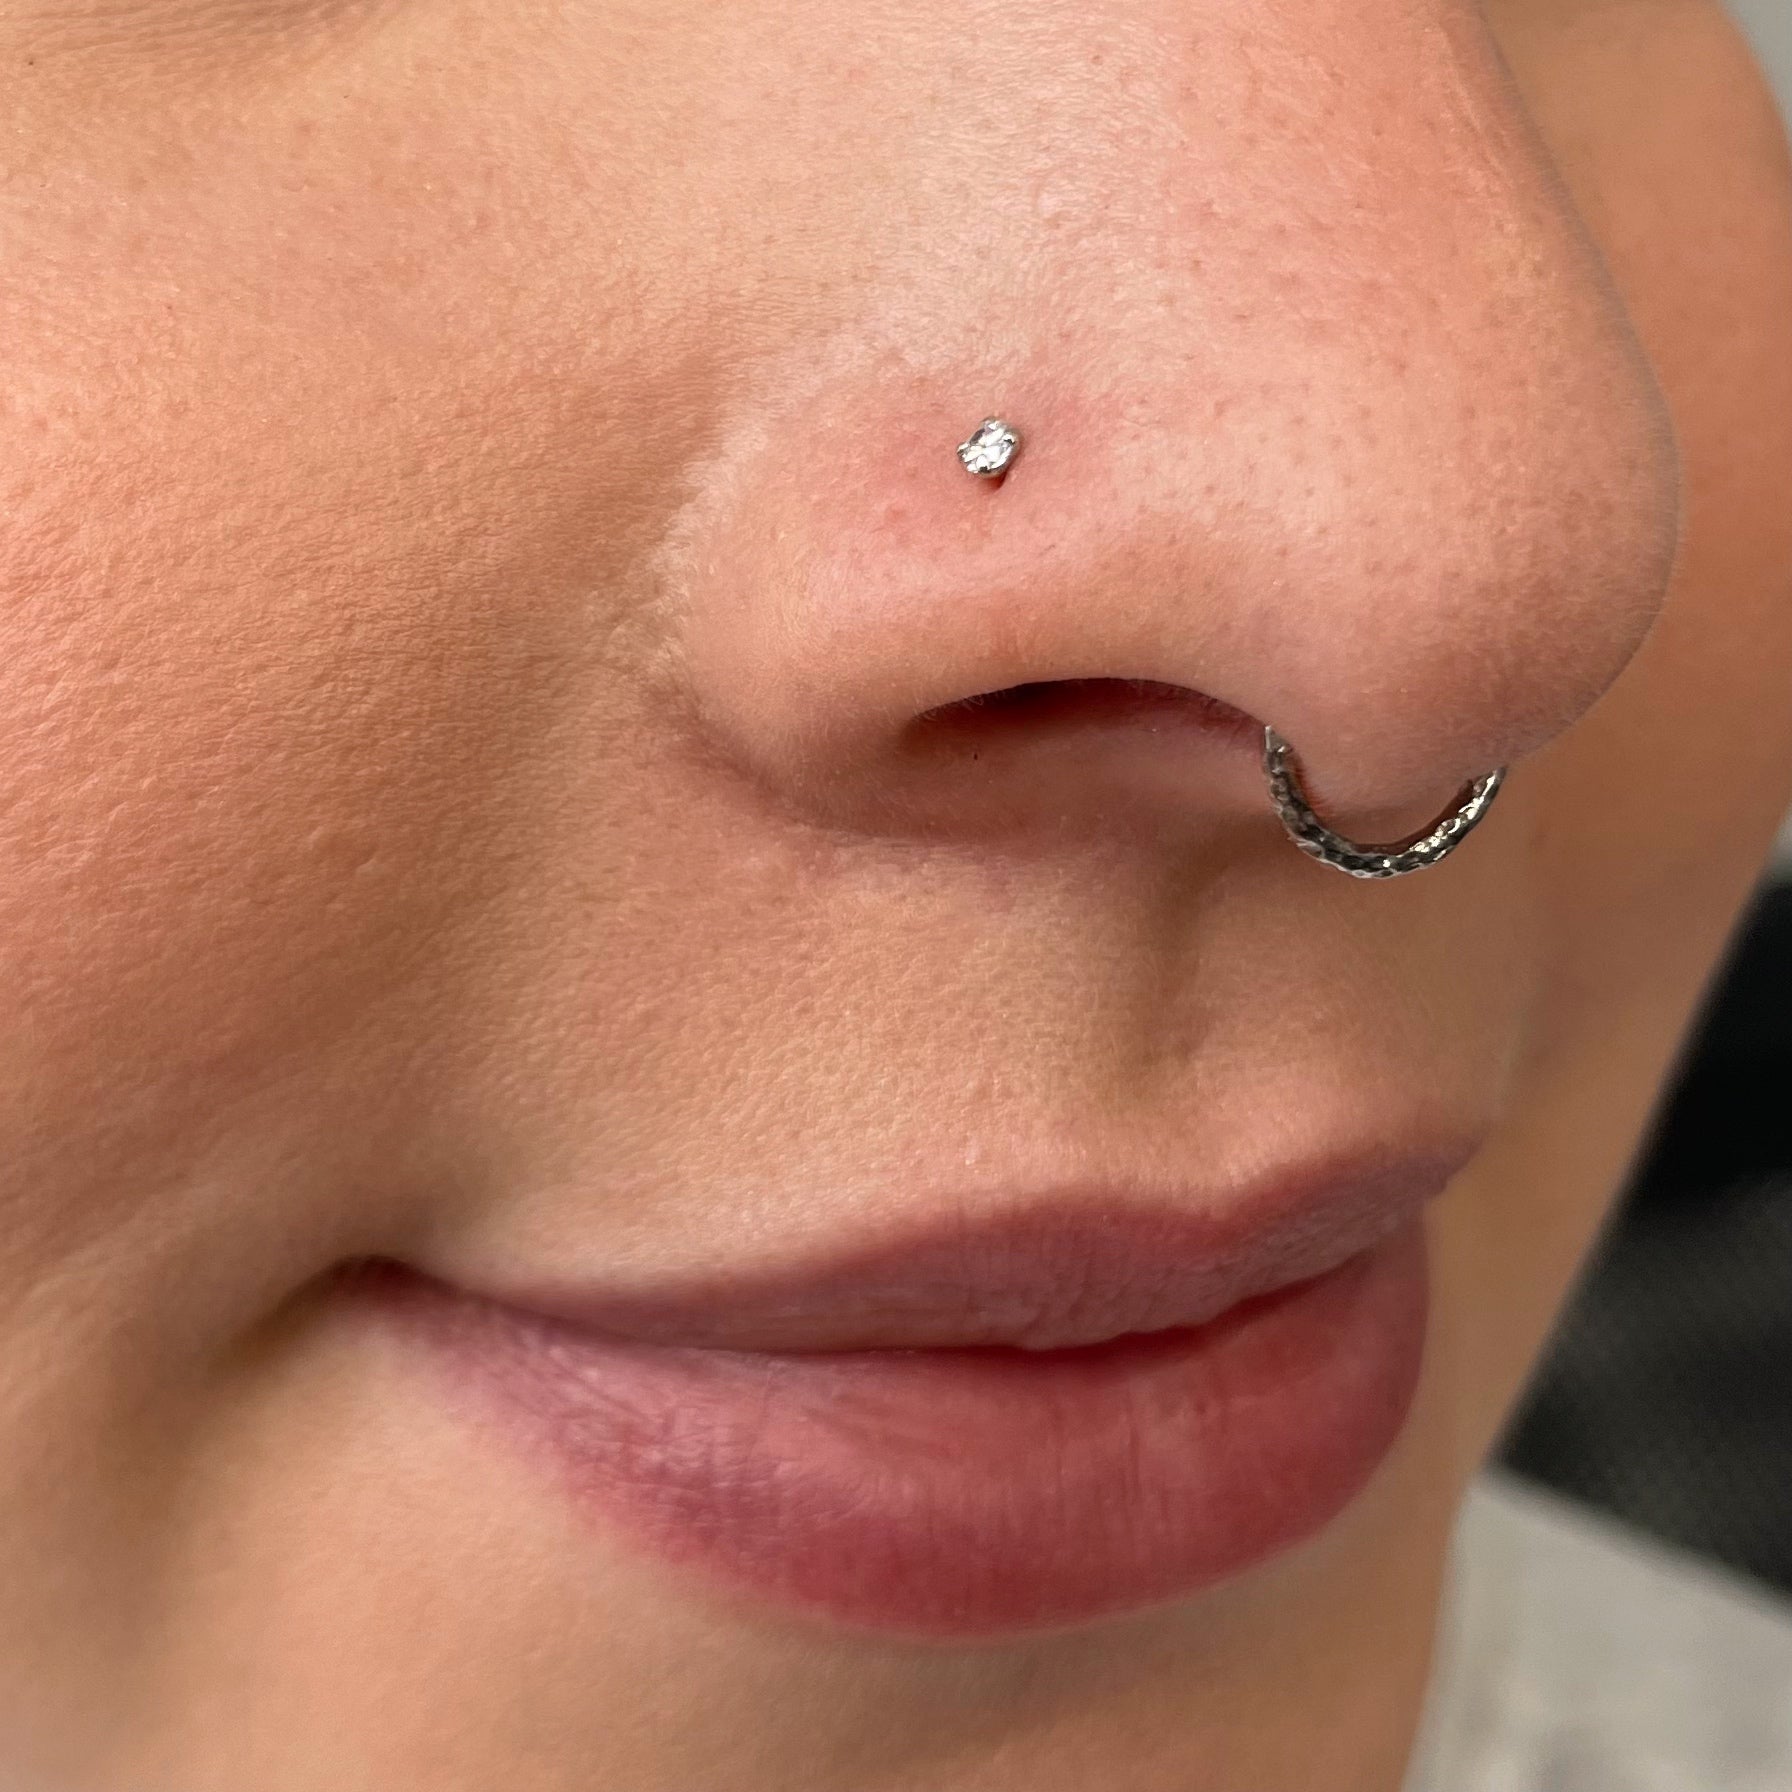 How to Heal a Nose Ring and Take Care of Infections: Aftercare Tips